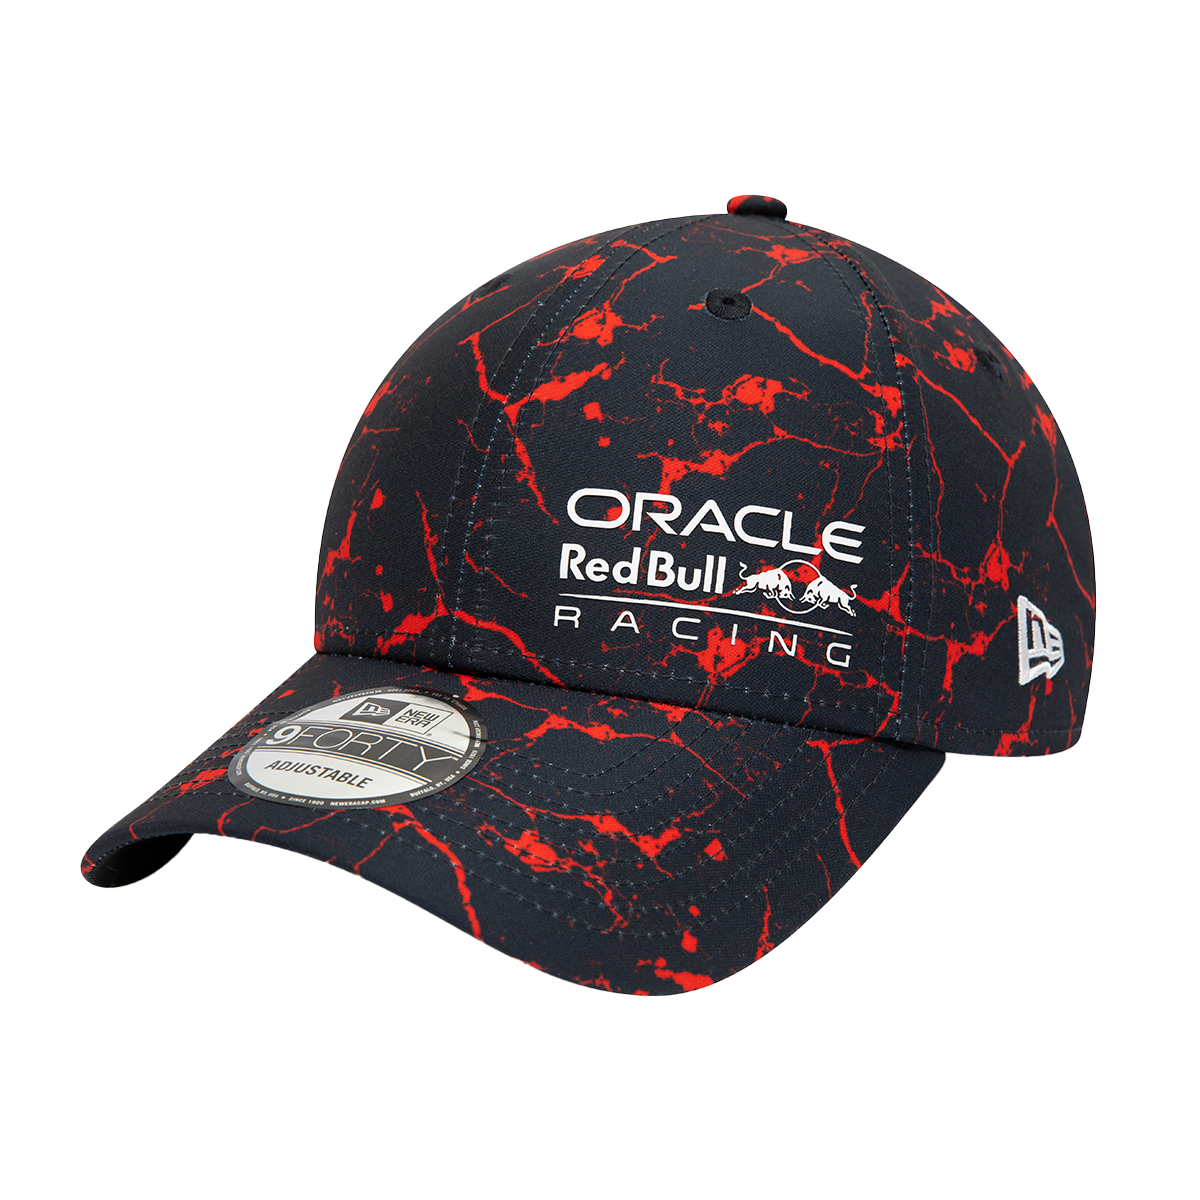 Red Bull Lifestyle 9FORTY Cap - Red Bull Racing